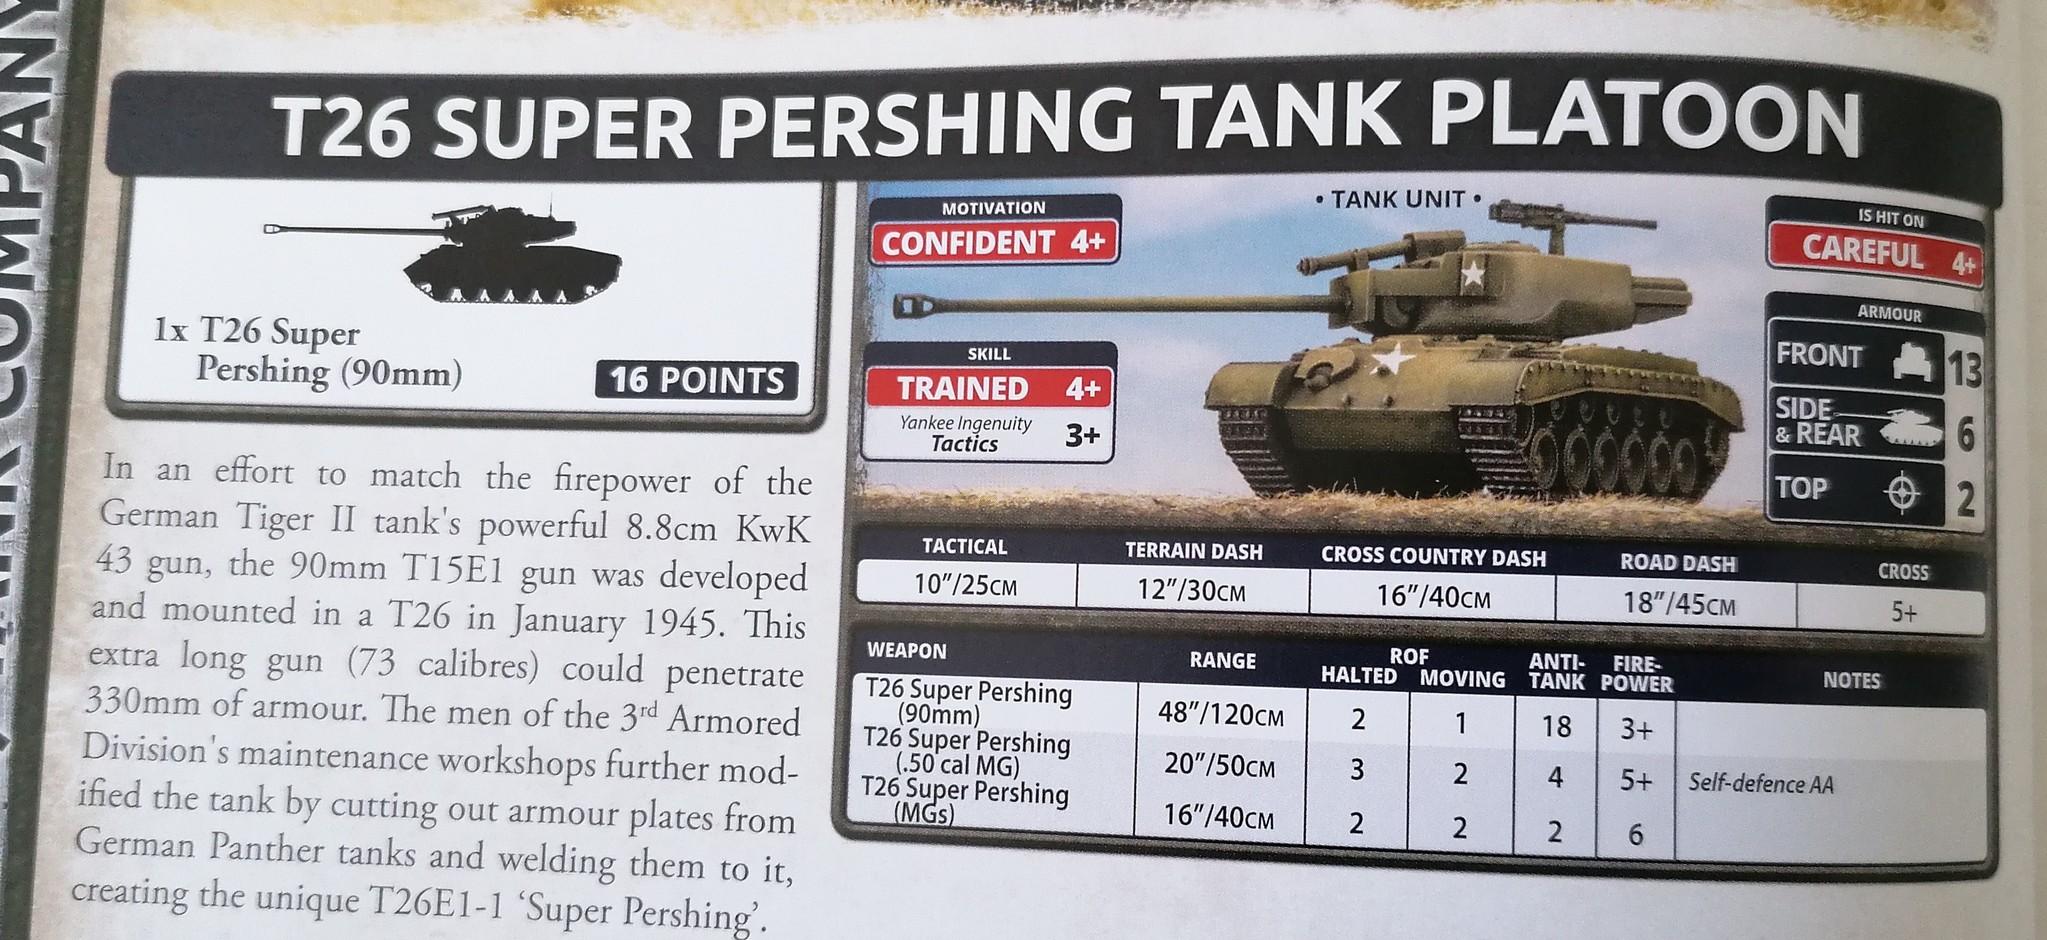 The Super Pershing, need we say more?